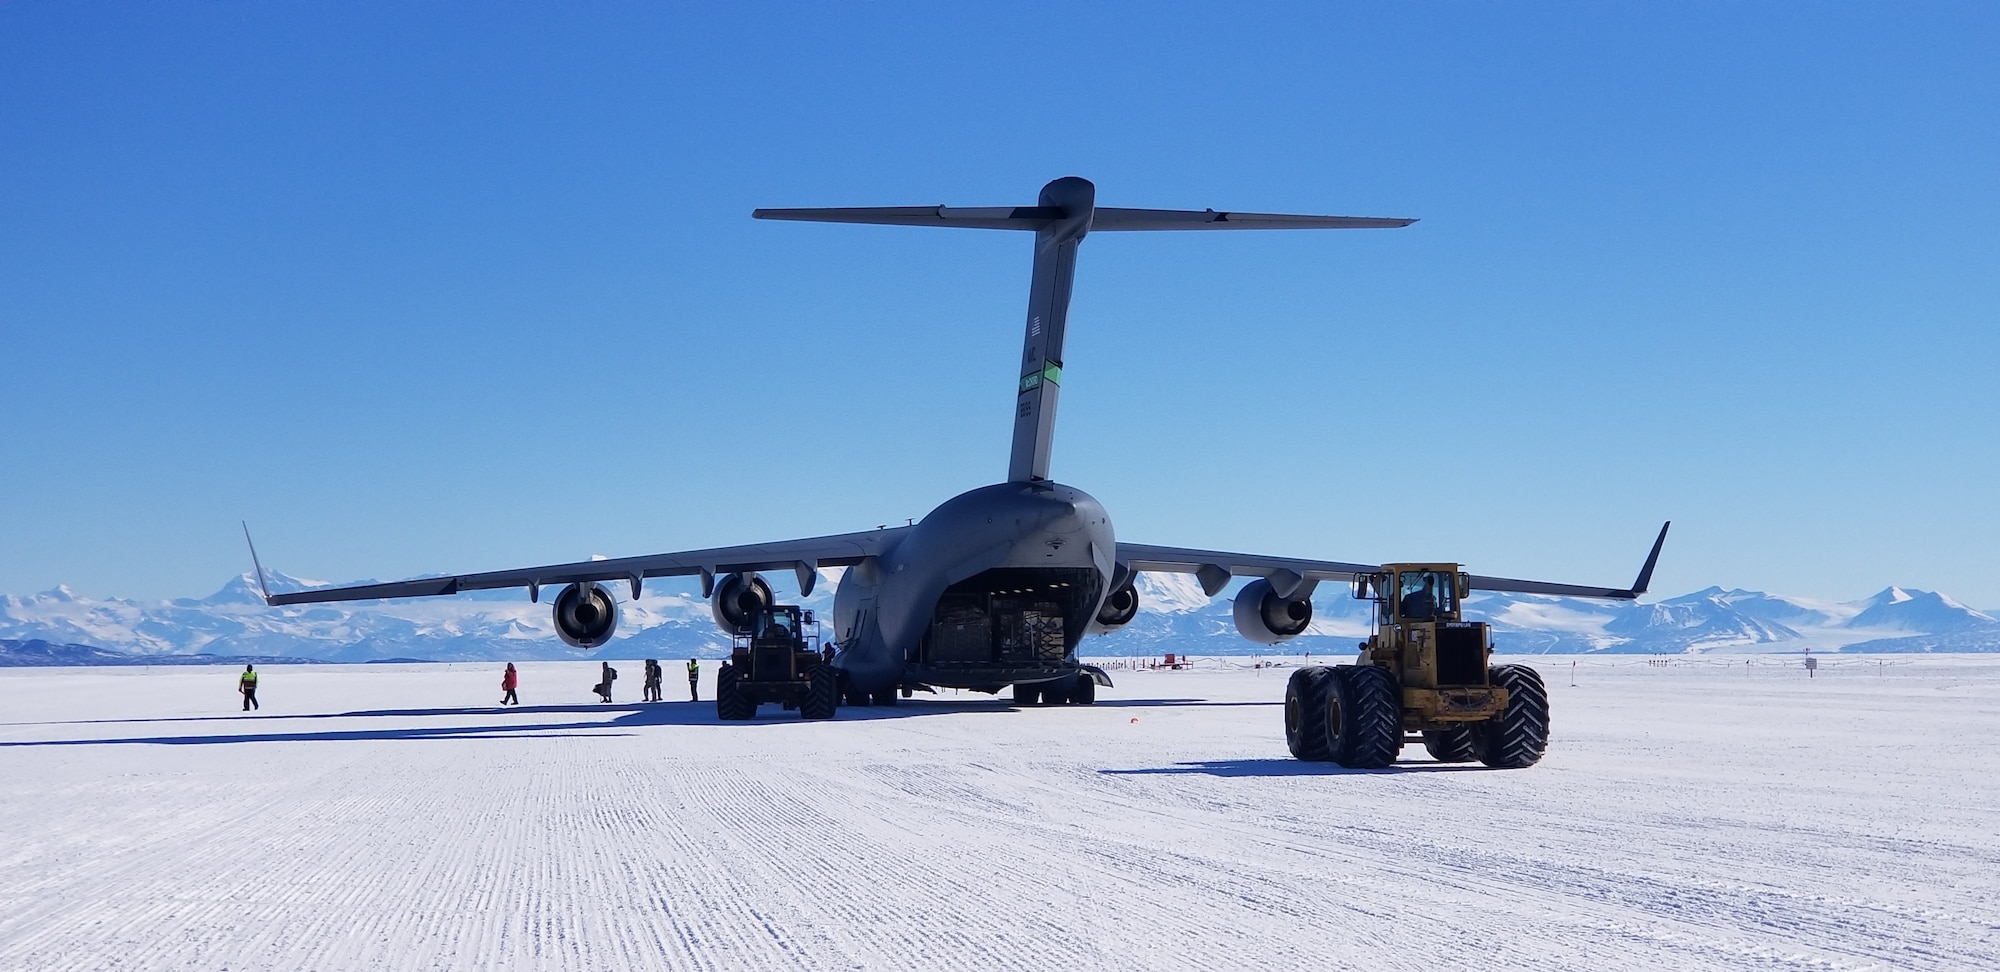 A Team McChord C17 is unloaded at McMurdo Station, Antarctica.